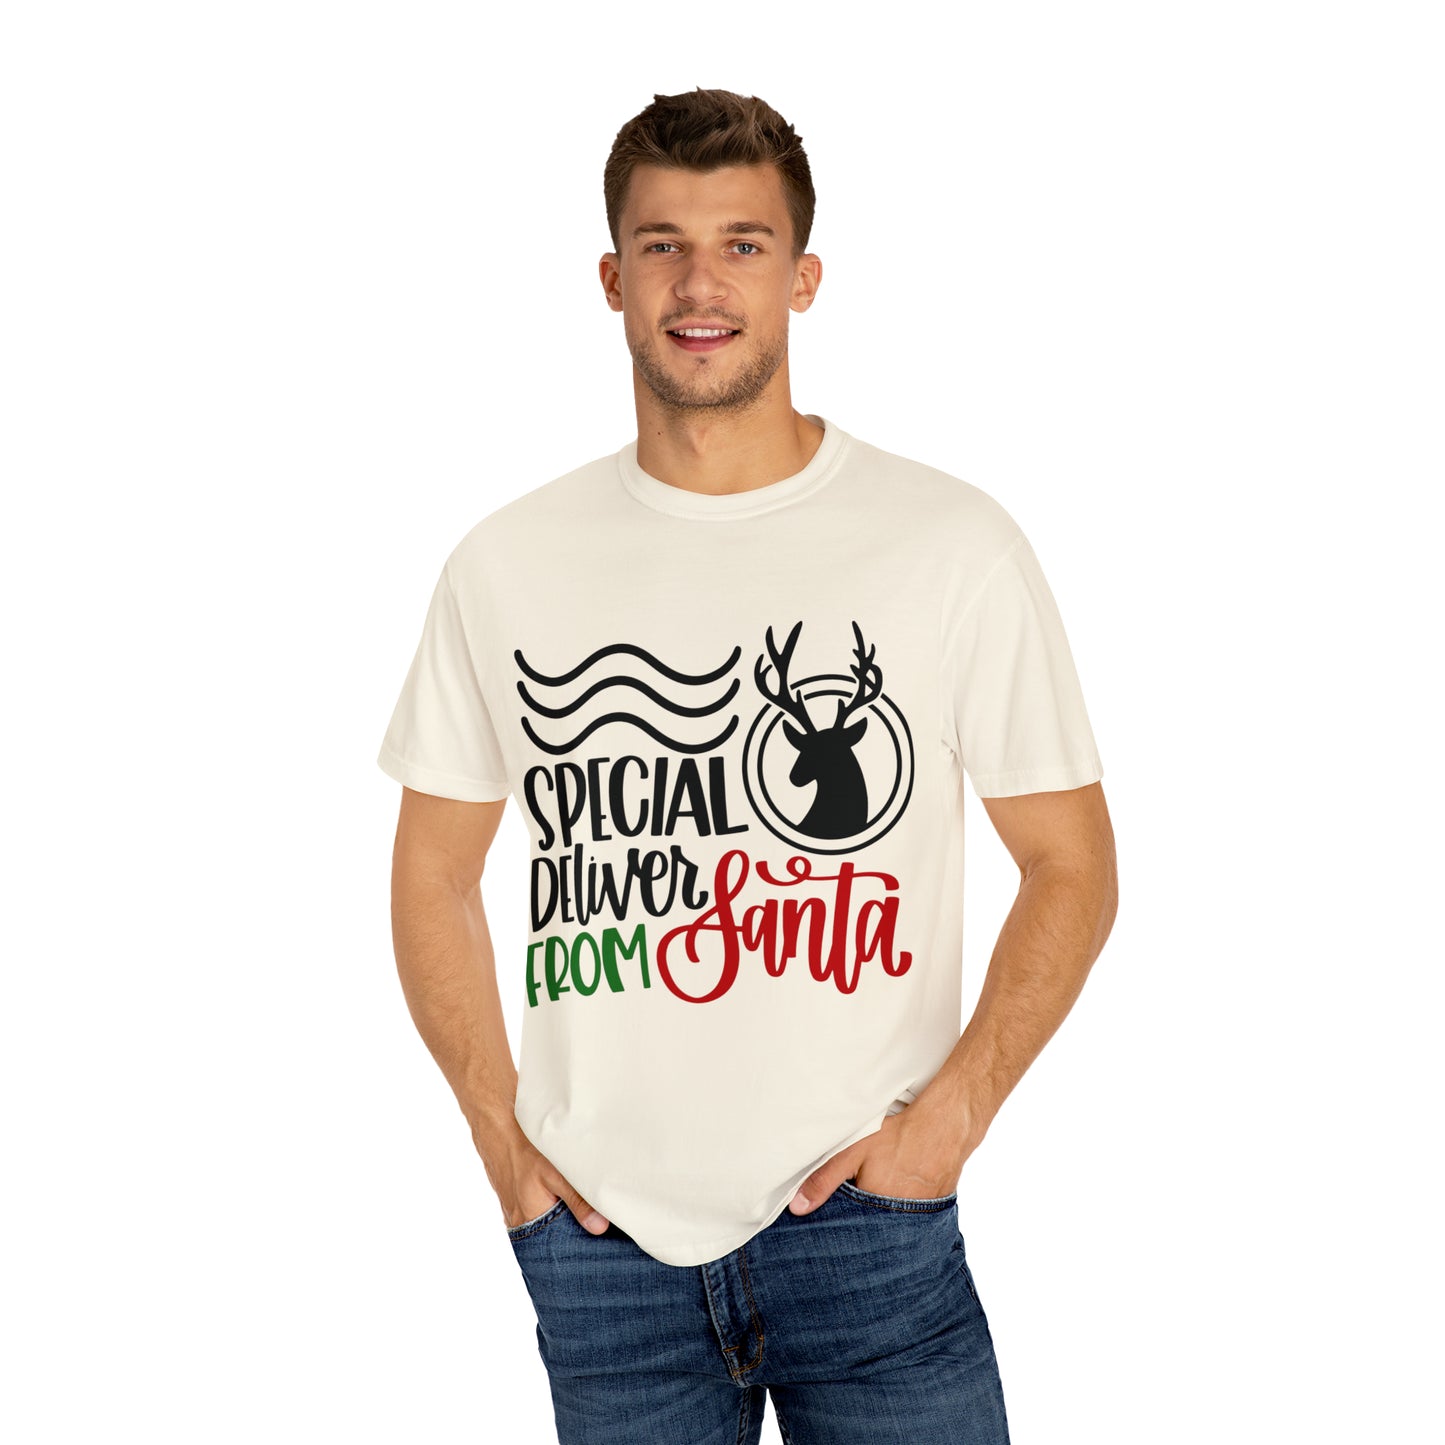 Special Delivery from Santa Unisex Garment-Dyed T-shirt